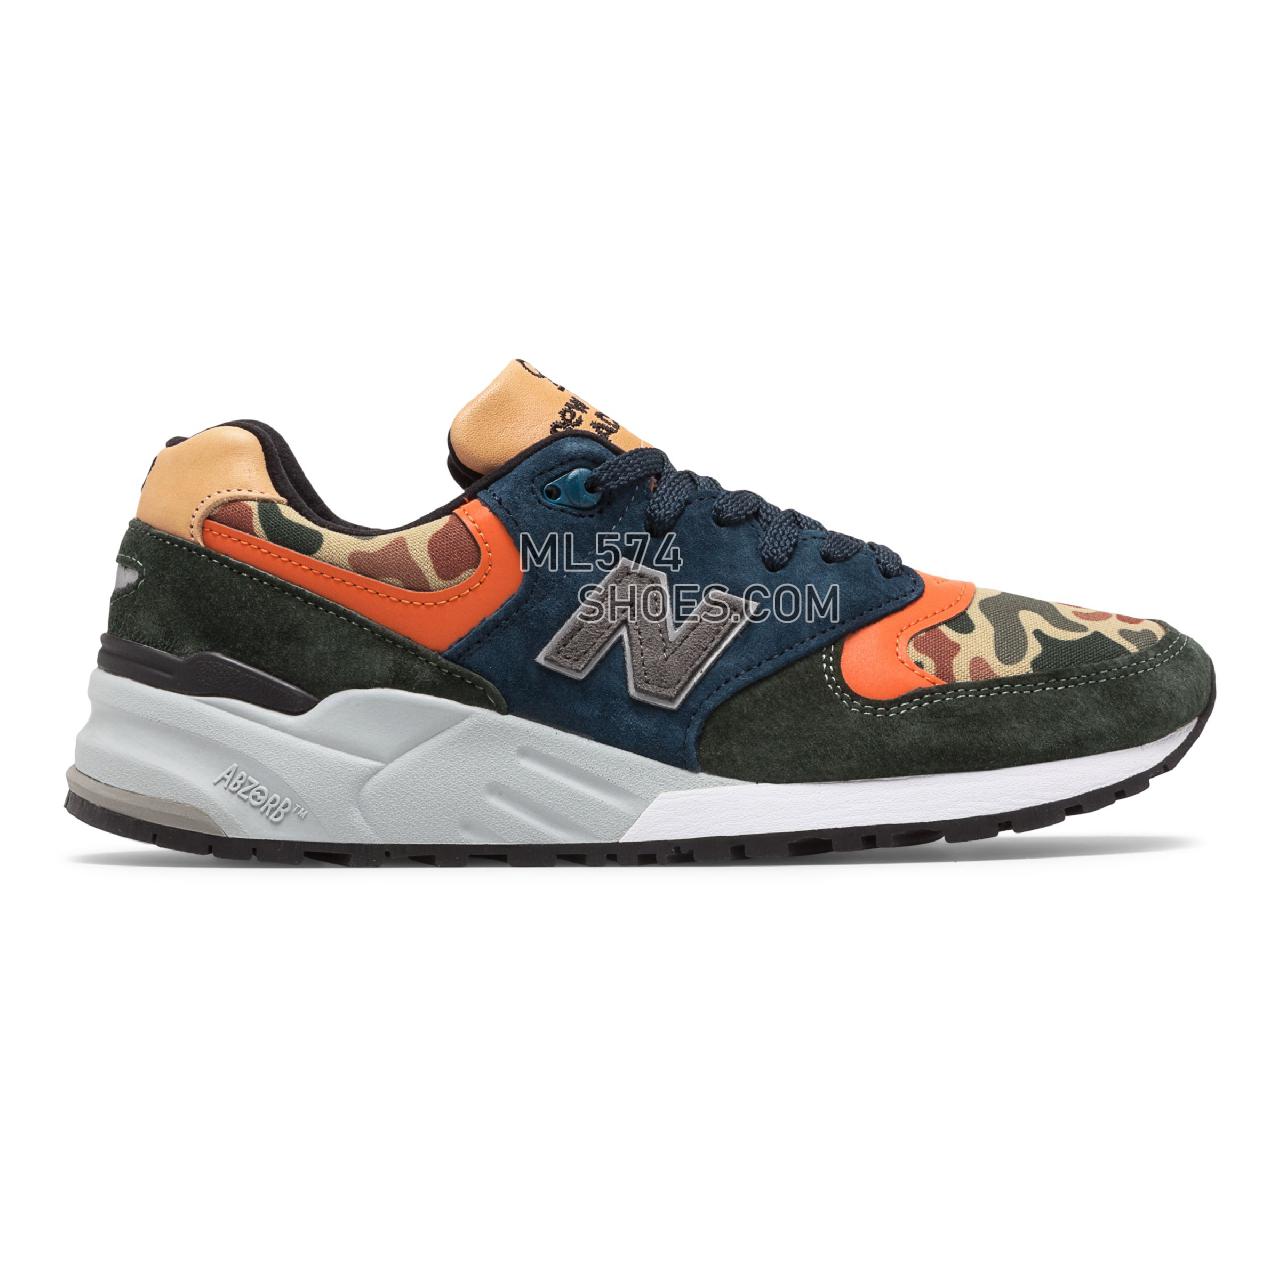 New Balance 999 Made in US - Men's 999 - Classic Green with Blue - M999NI